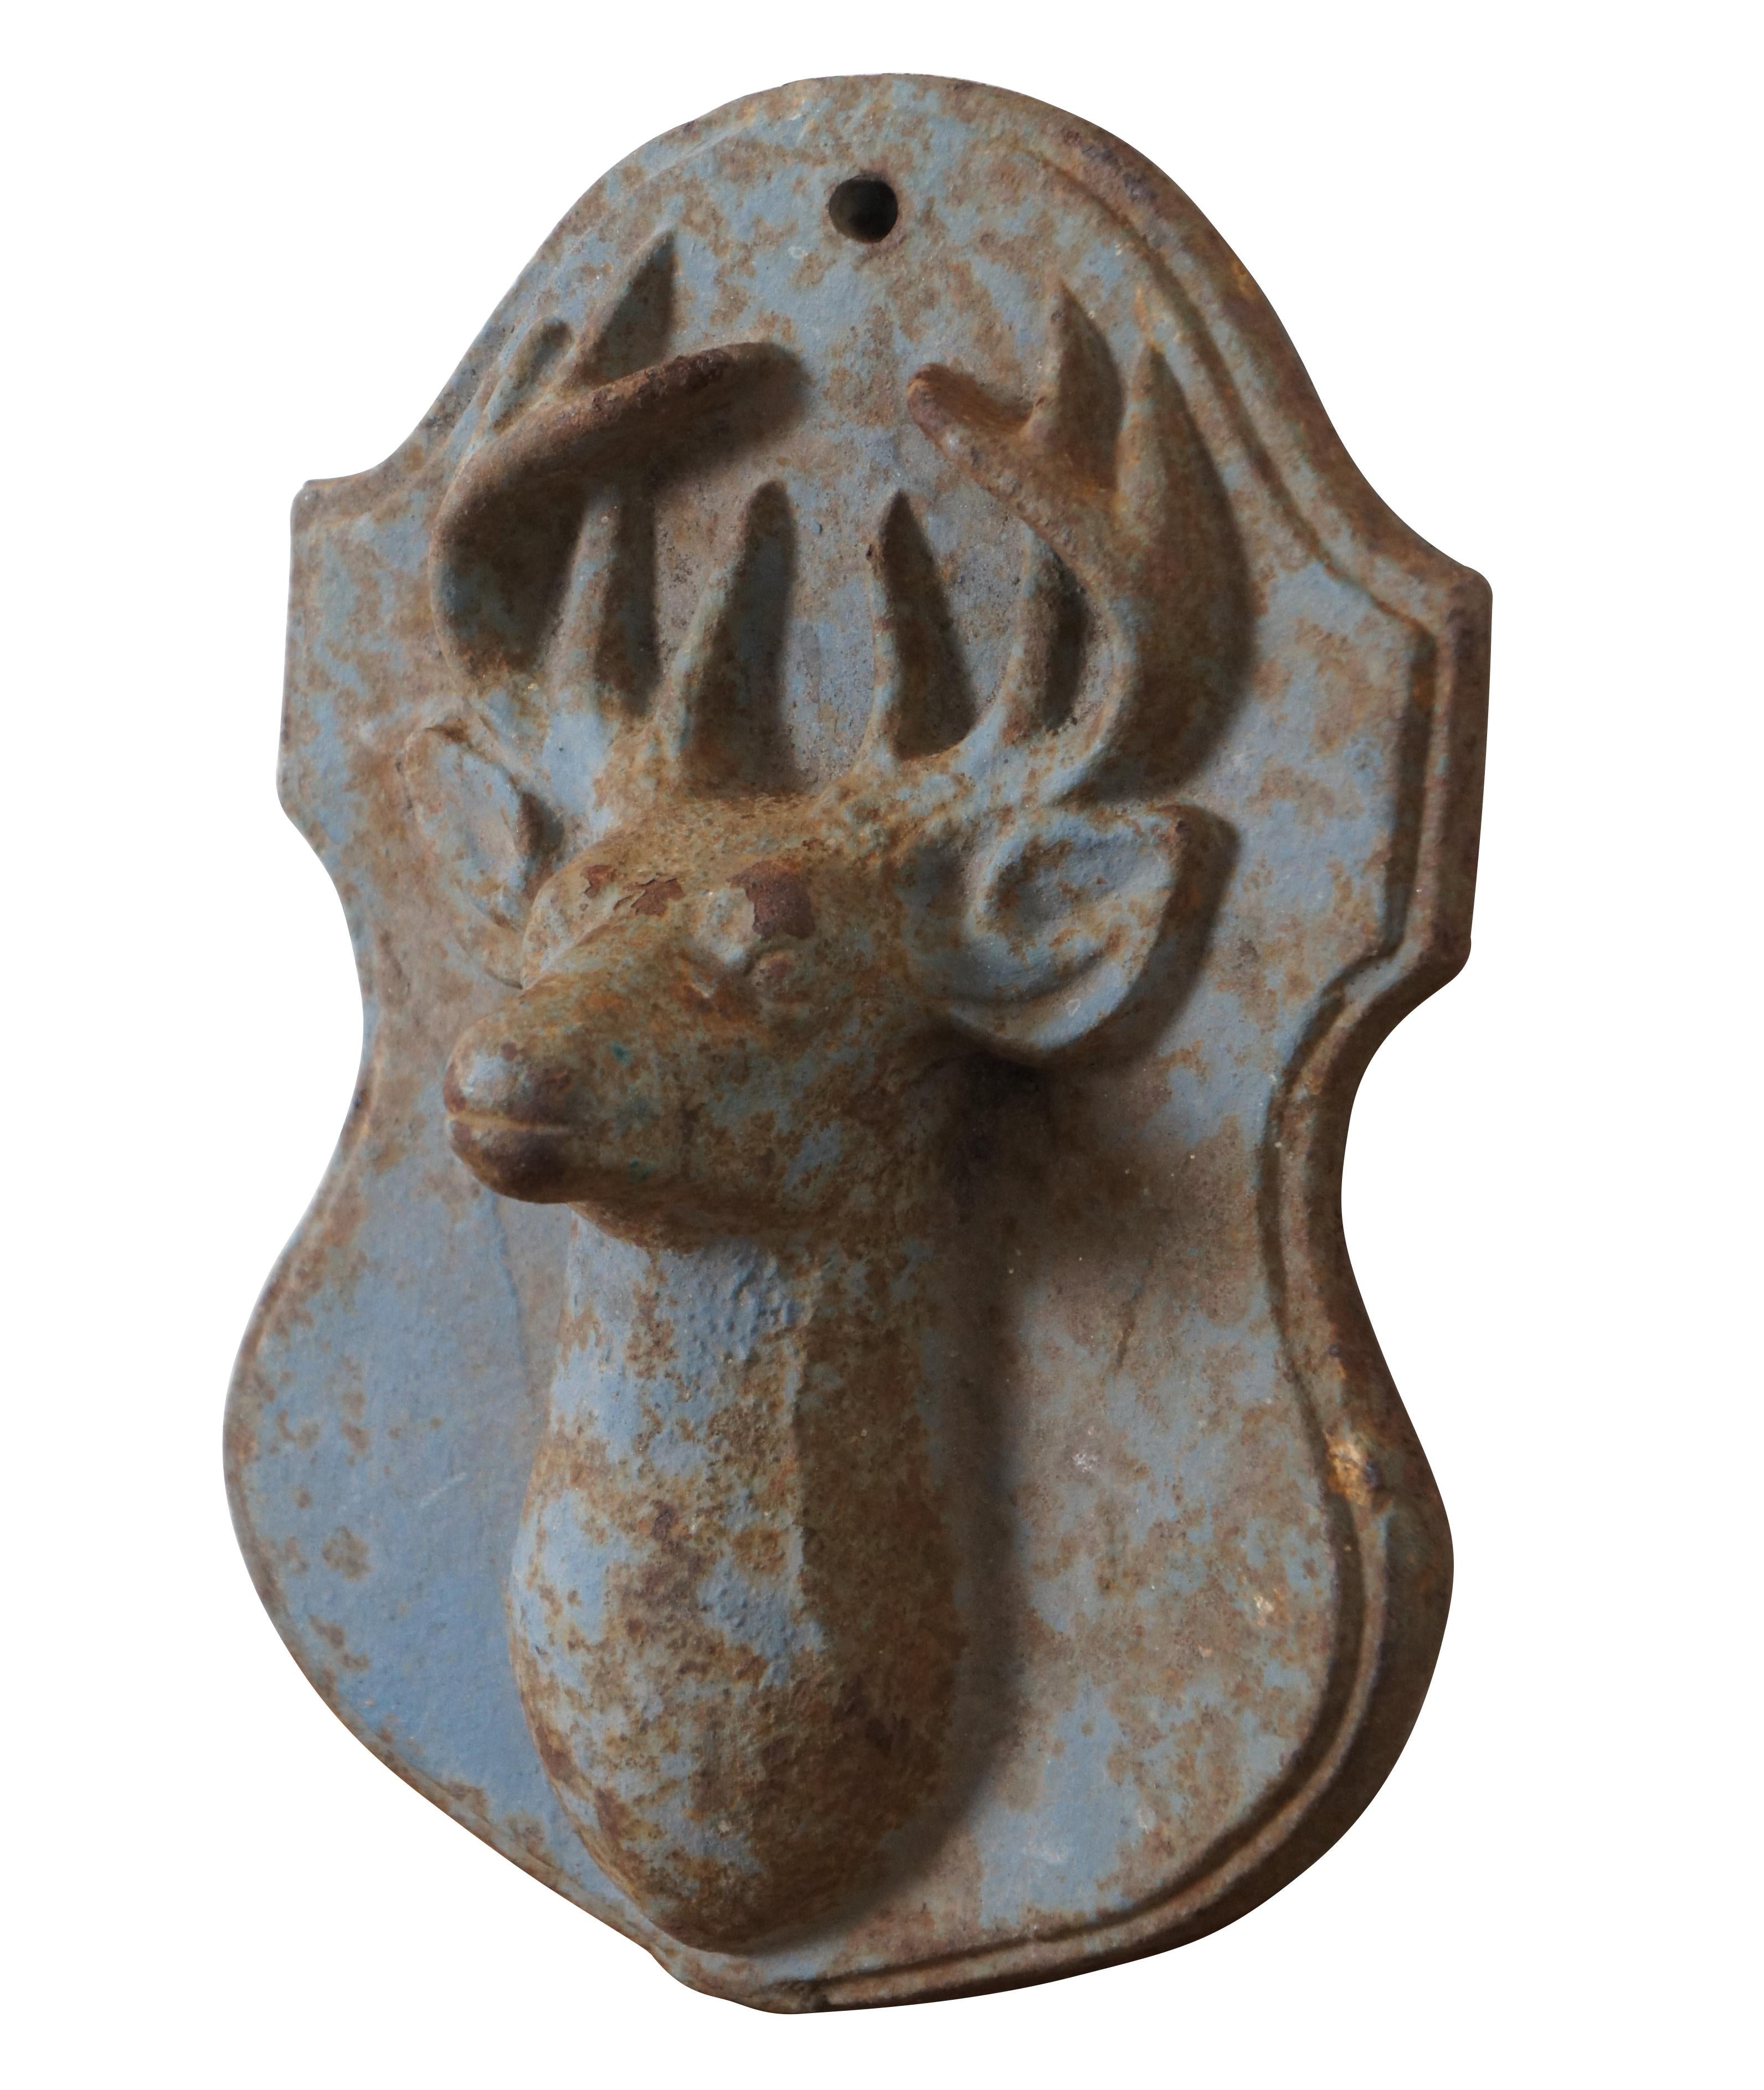 Heavy vintage cast iron wall hanging plaque in the shape of a shield with a rounded top, mounted with the head of a buck / deer. Painted light blue.